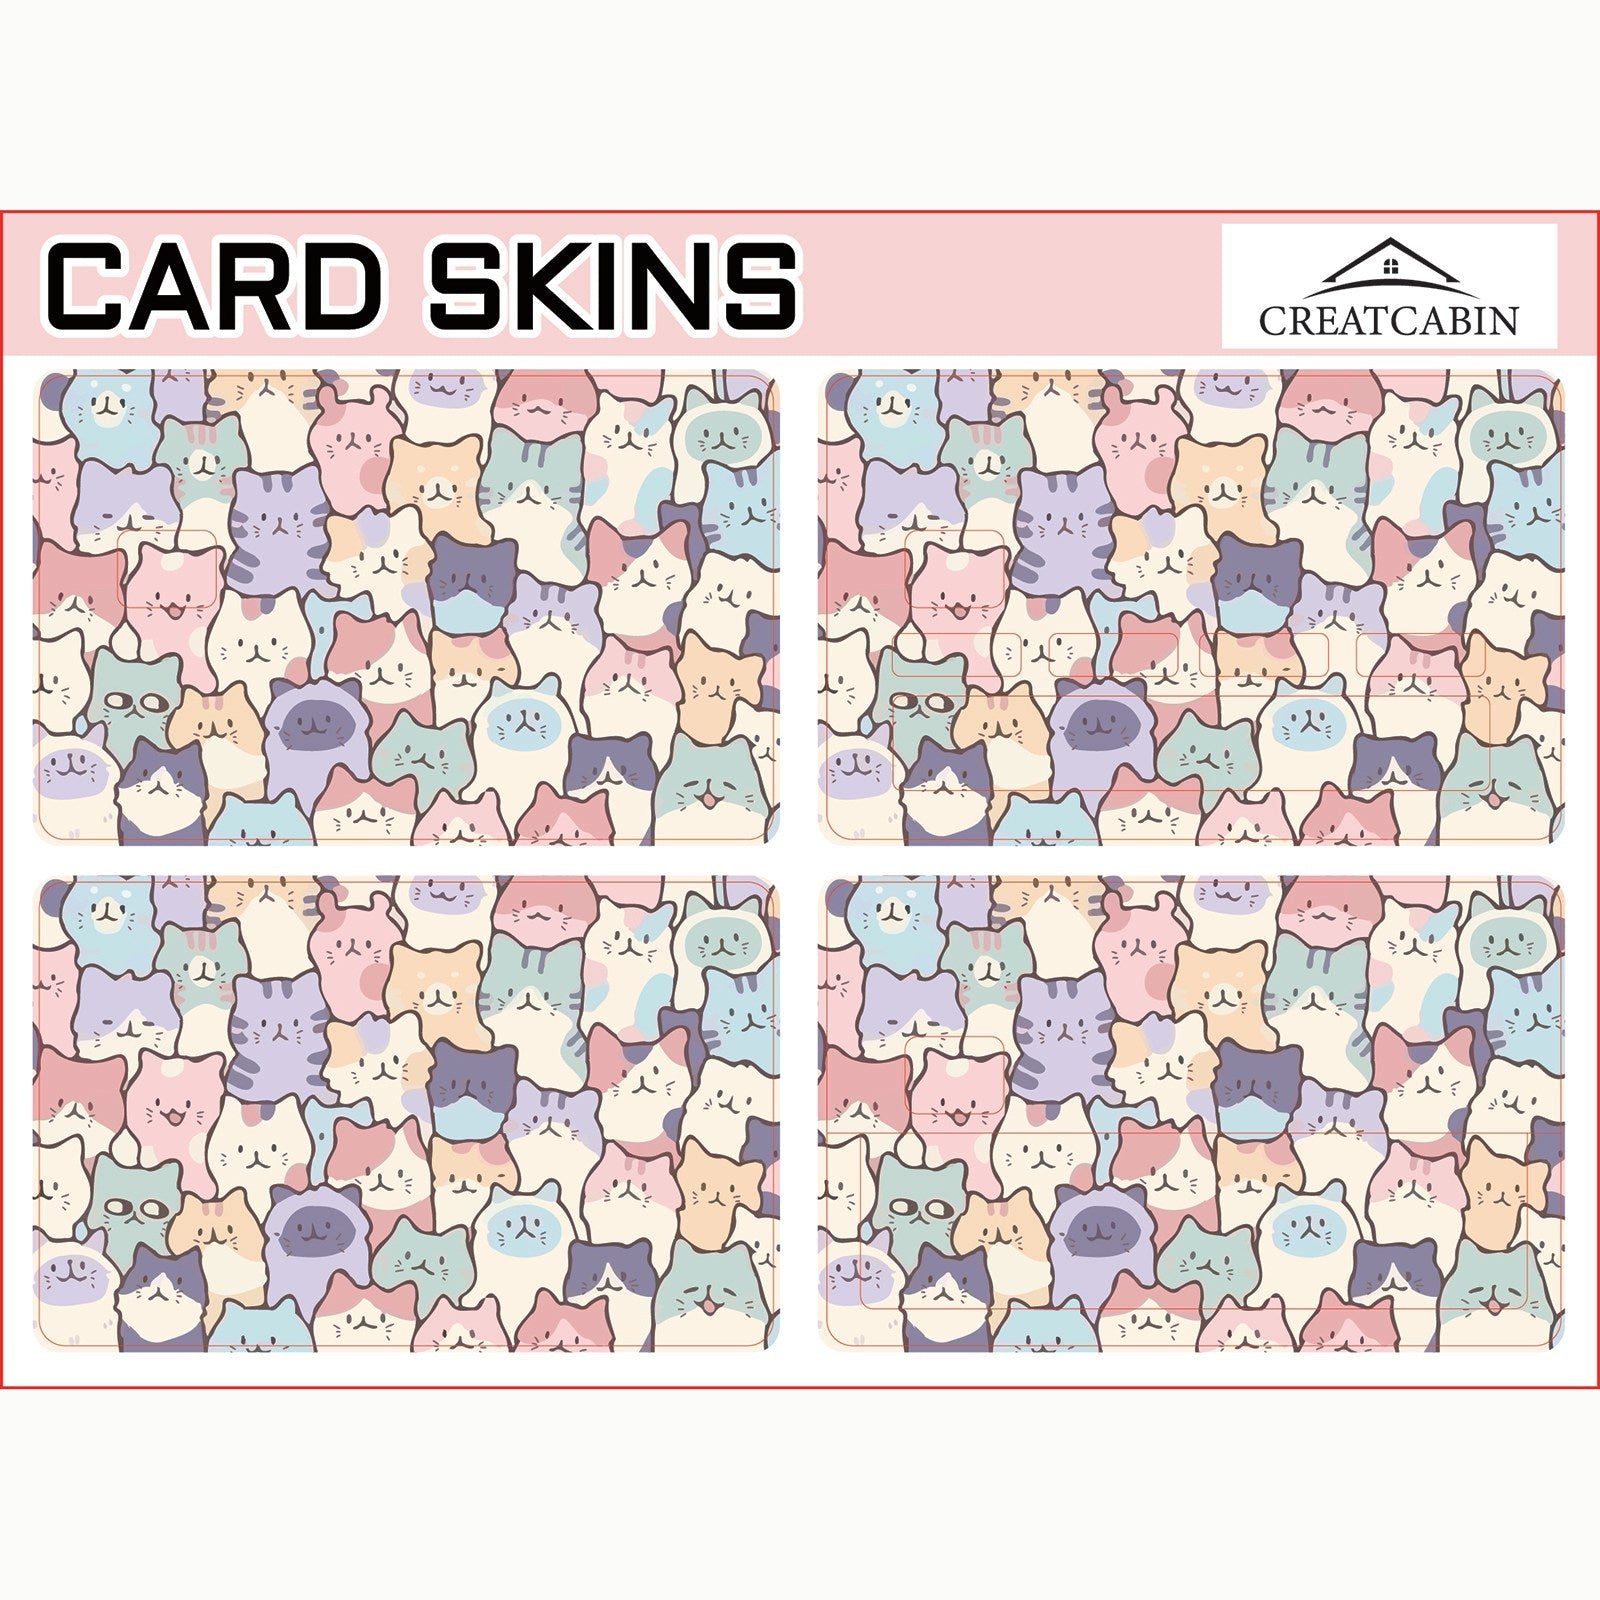 Bank Card Stickers 